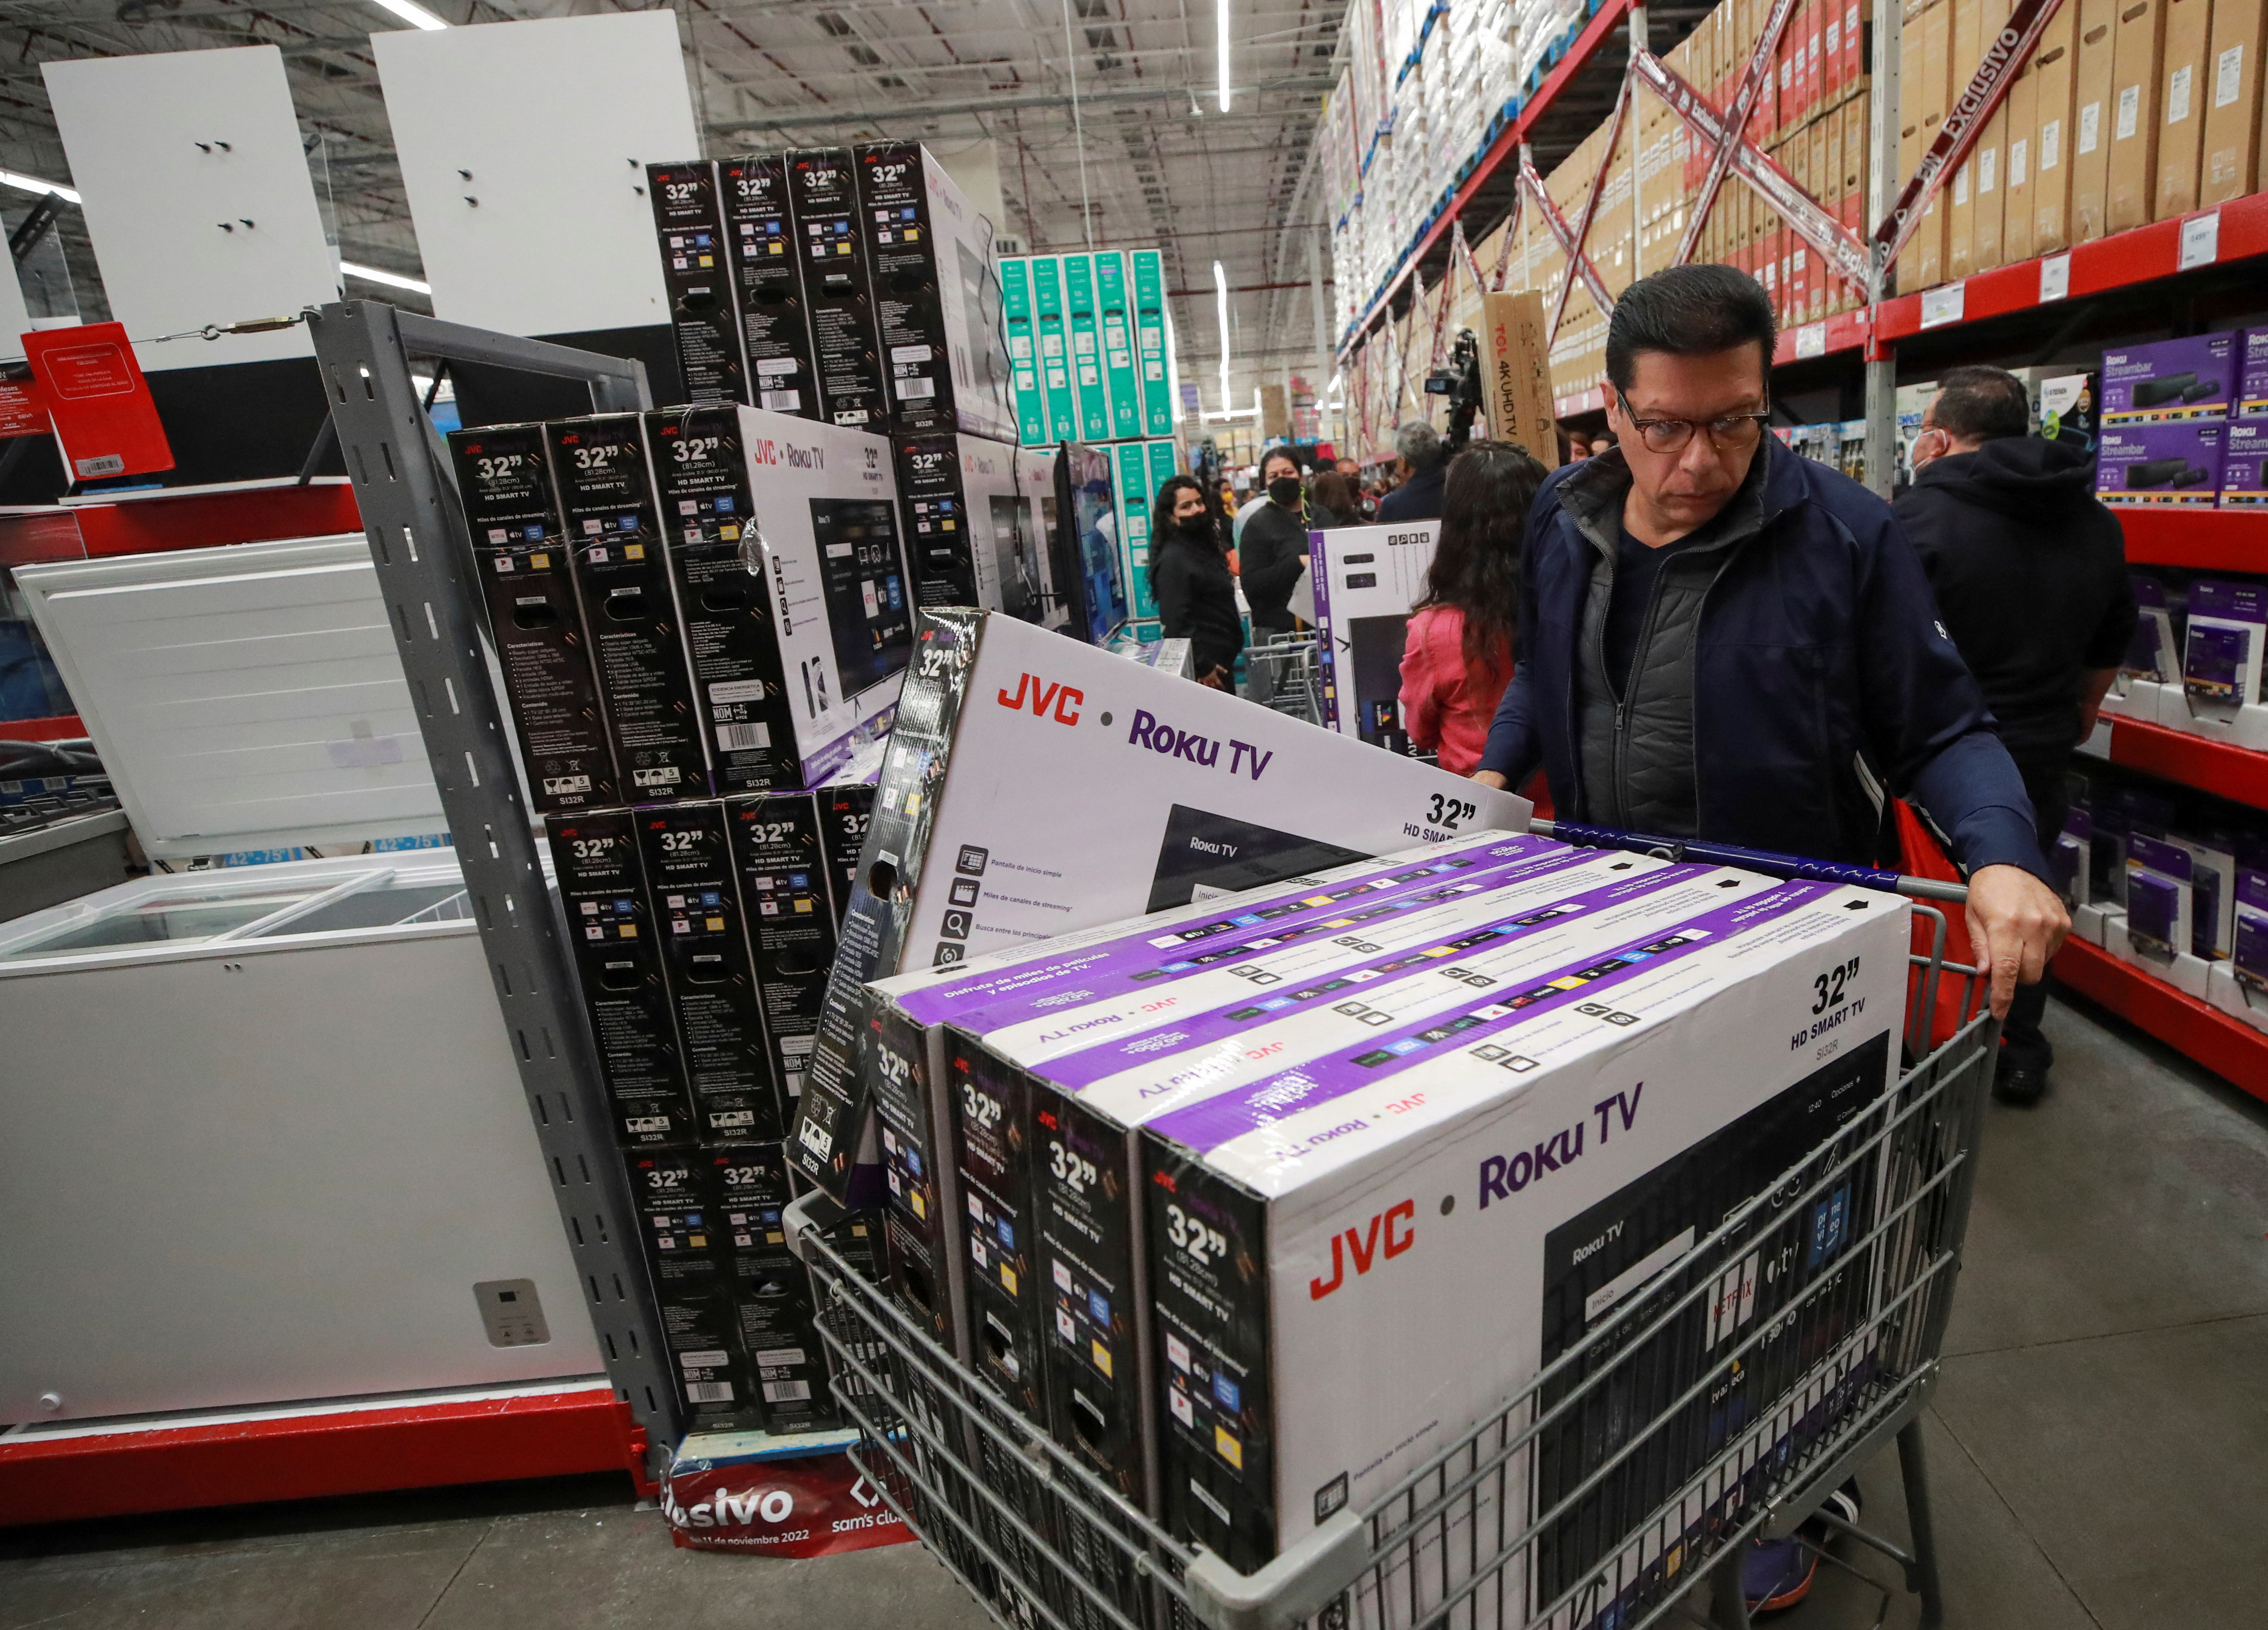 A shopper pushes a cart with television screens during the opening of Mexican shopping season event "El Buen Fin" (The Good Weekend) as the consumers buy emulating the "Black Friday" shopping, at Sam's Club store in Mexico City, Mexico, November 11, 2022. REUTERS/Henry Romero